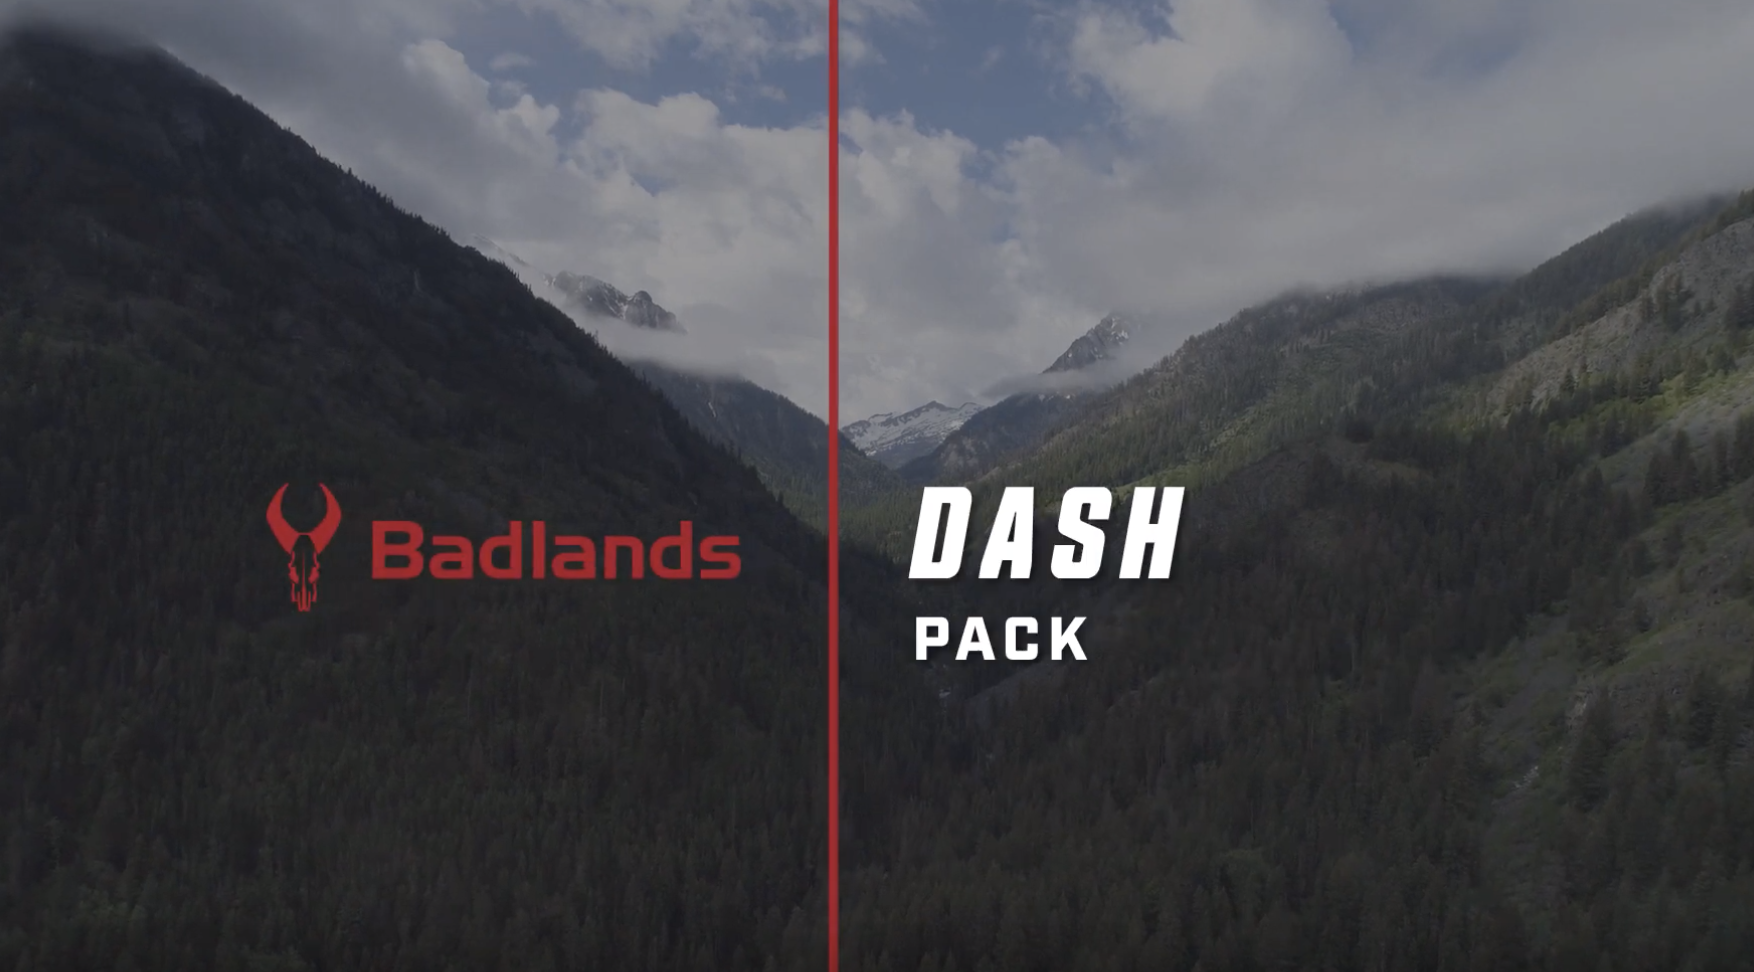 Learn more about the Dash Pack